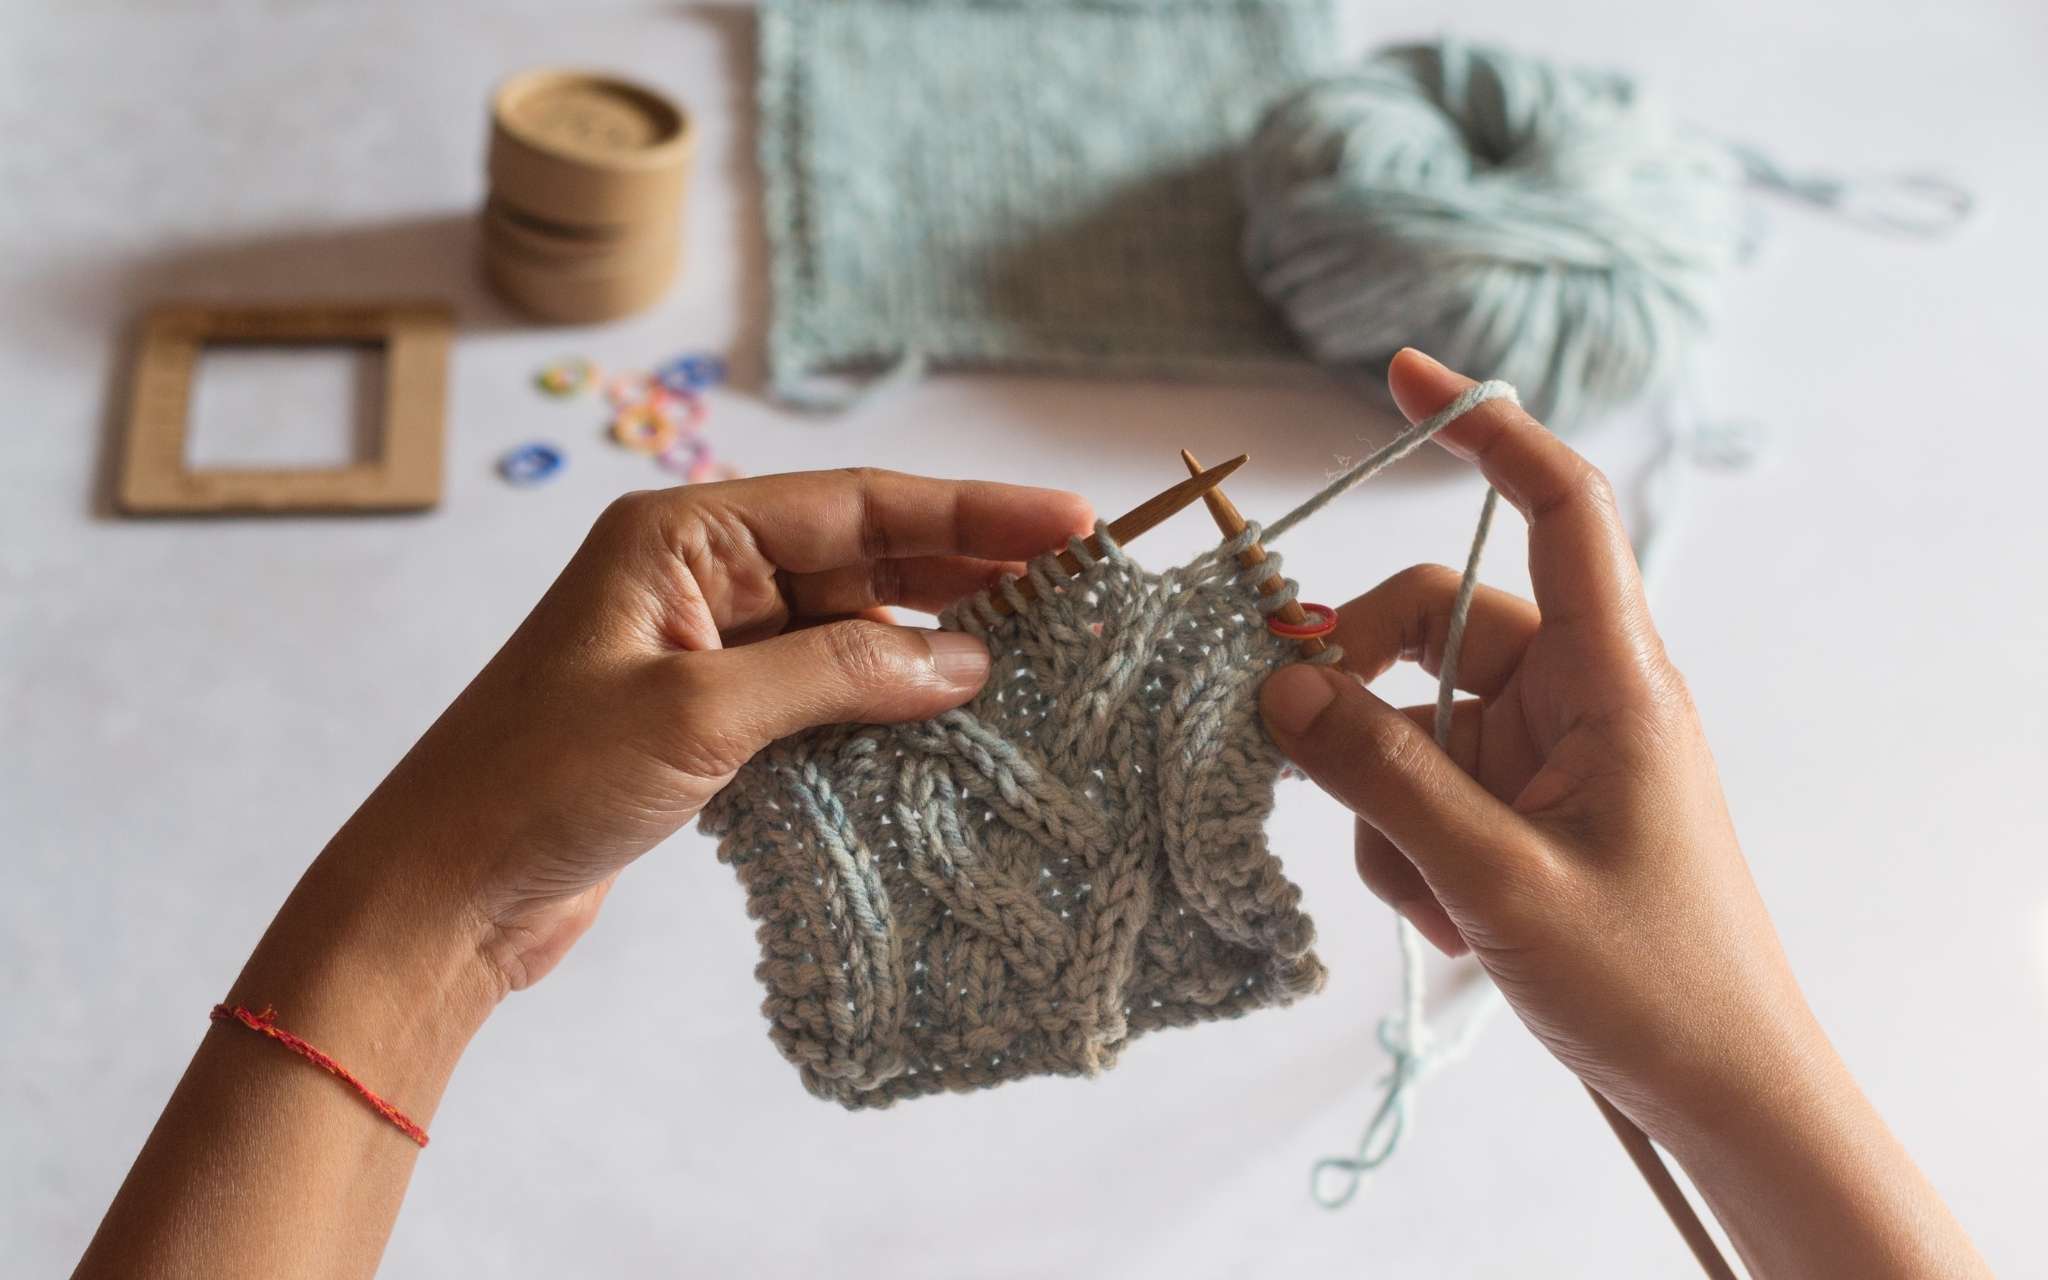 A woman of colour knits a pale blue cabled swatch on wooden needles. A completed swatch and measuring tools are on a flat surface at the top of the image.